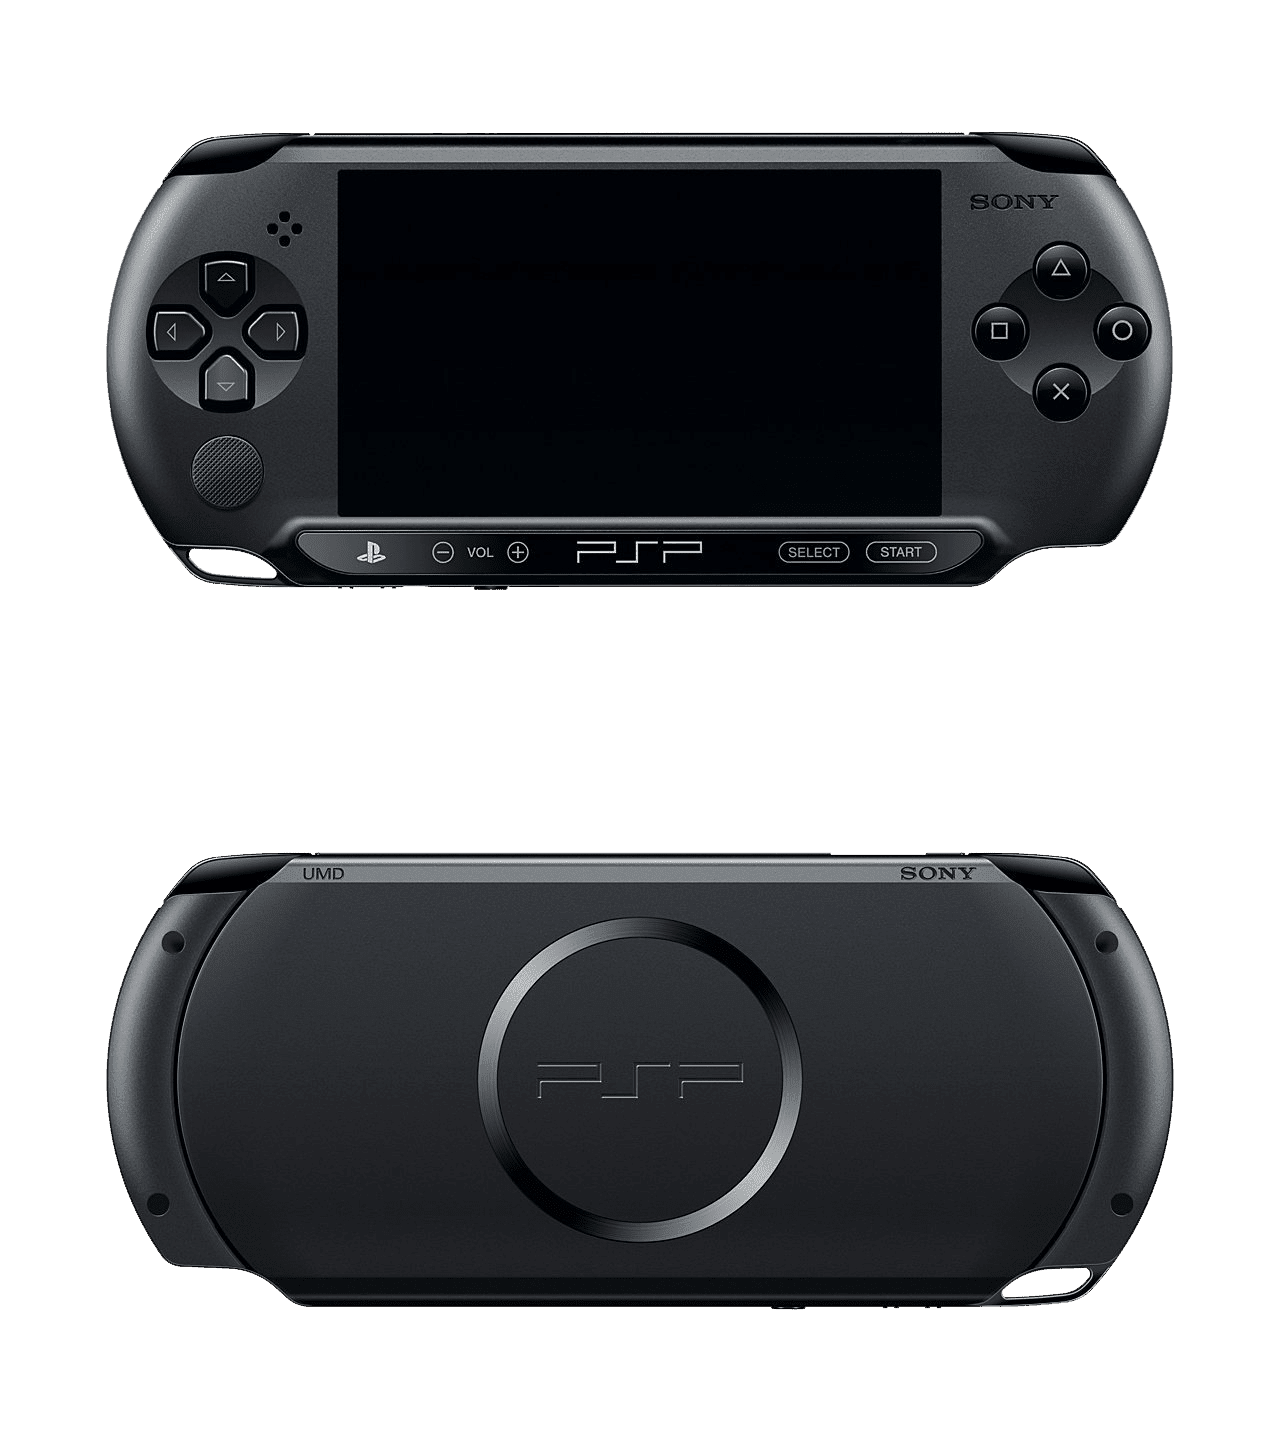 Sony PlayStation Portable Console - Charcoal Black E1000 Series / Street (PSP)